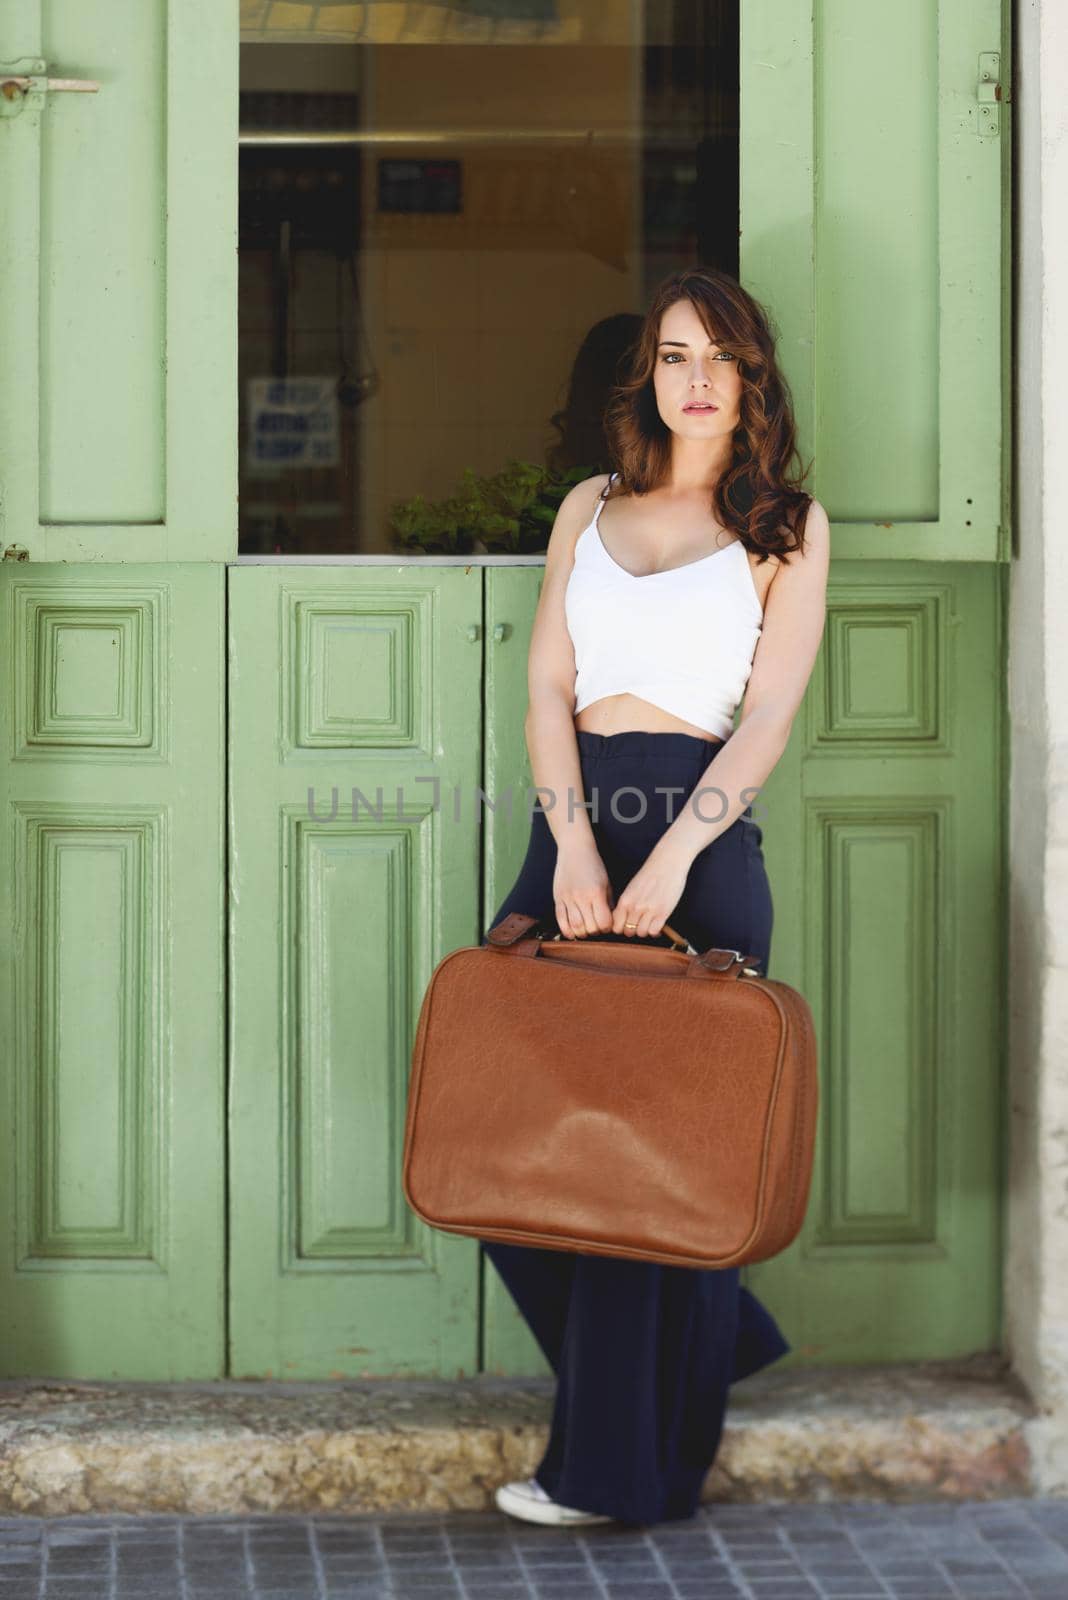 Beautiful girl with vintage bag against green door in urban background. Casual spring clothes